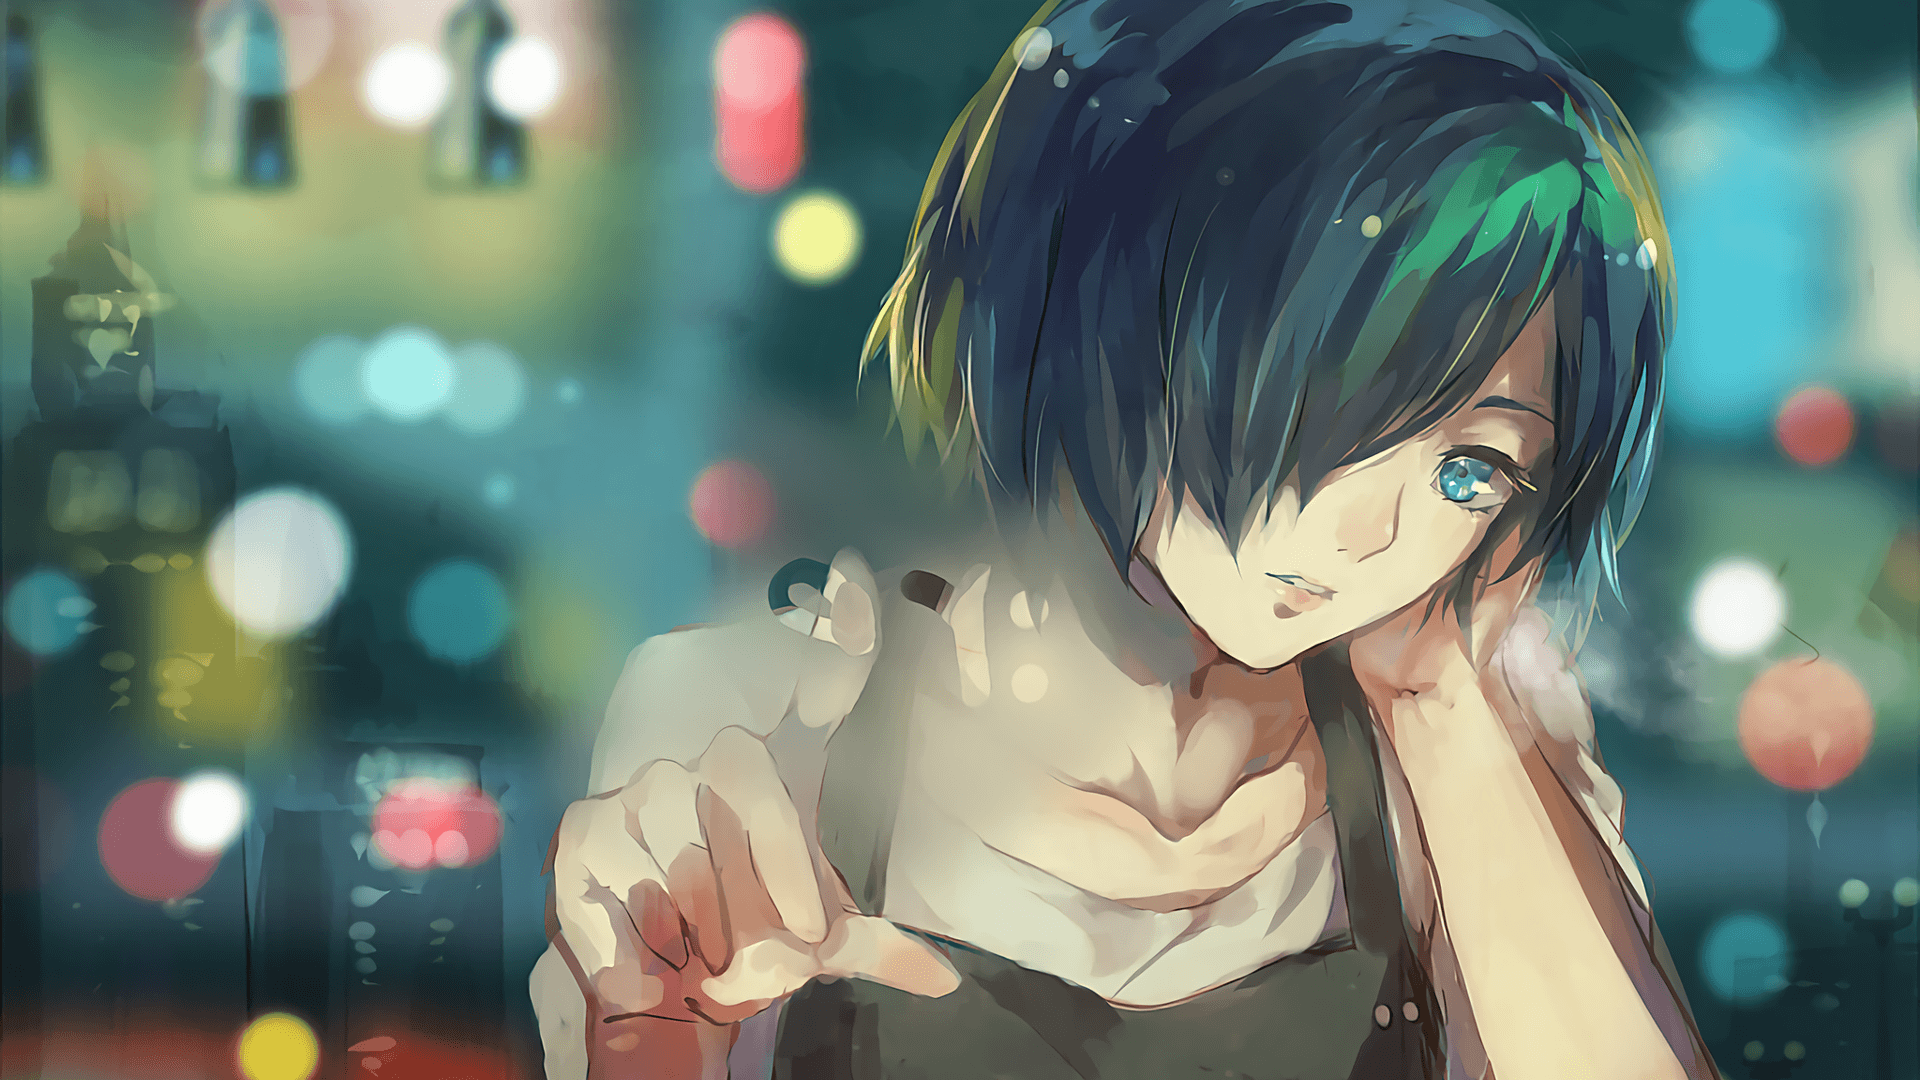 The Best Tokyo Ghoul Re Wallpaper 1080p